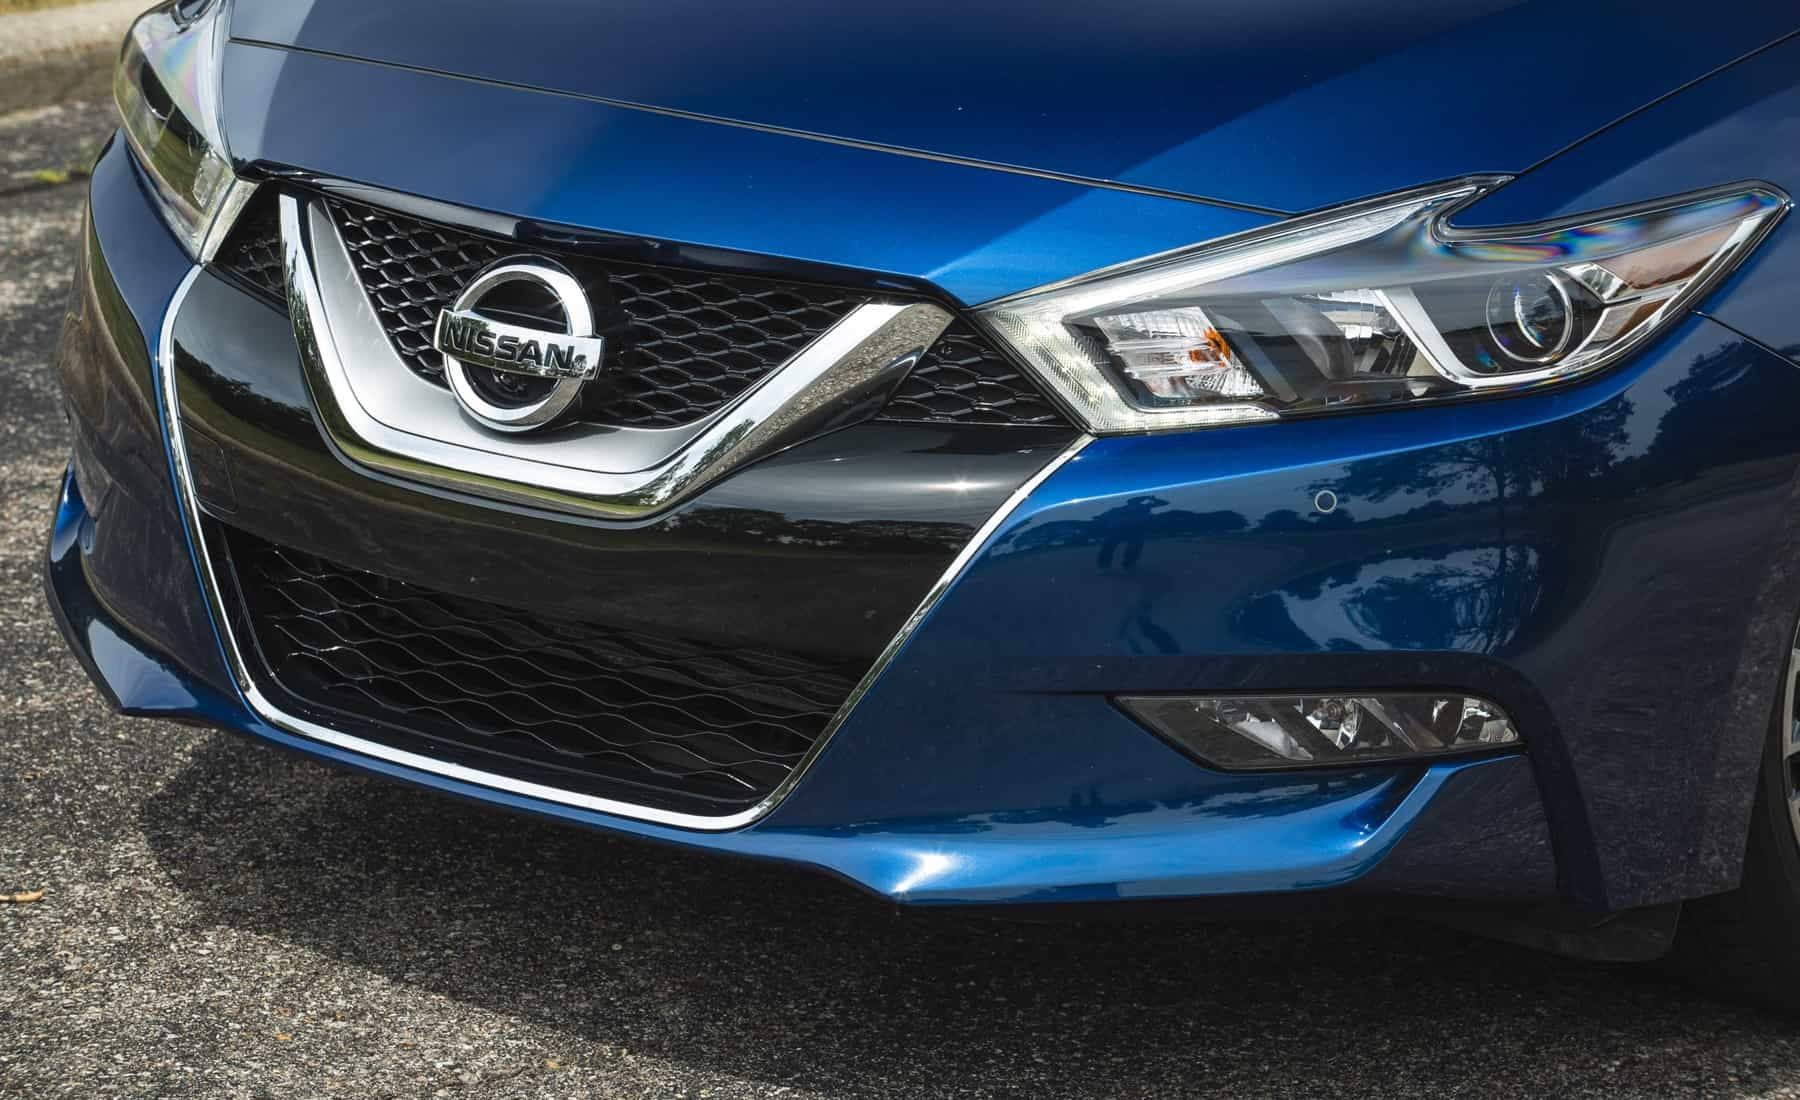 2017 Nissan Maxima Exterior View Grille And Bumper (View 31 of 40)